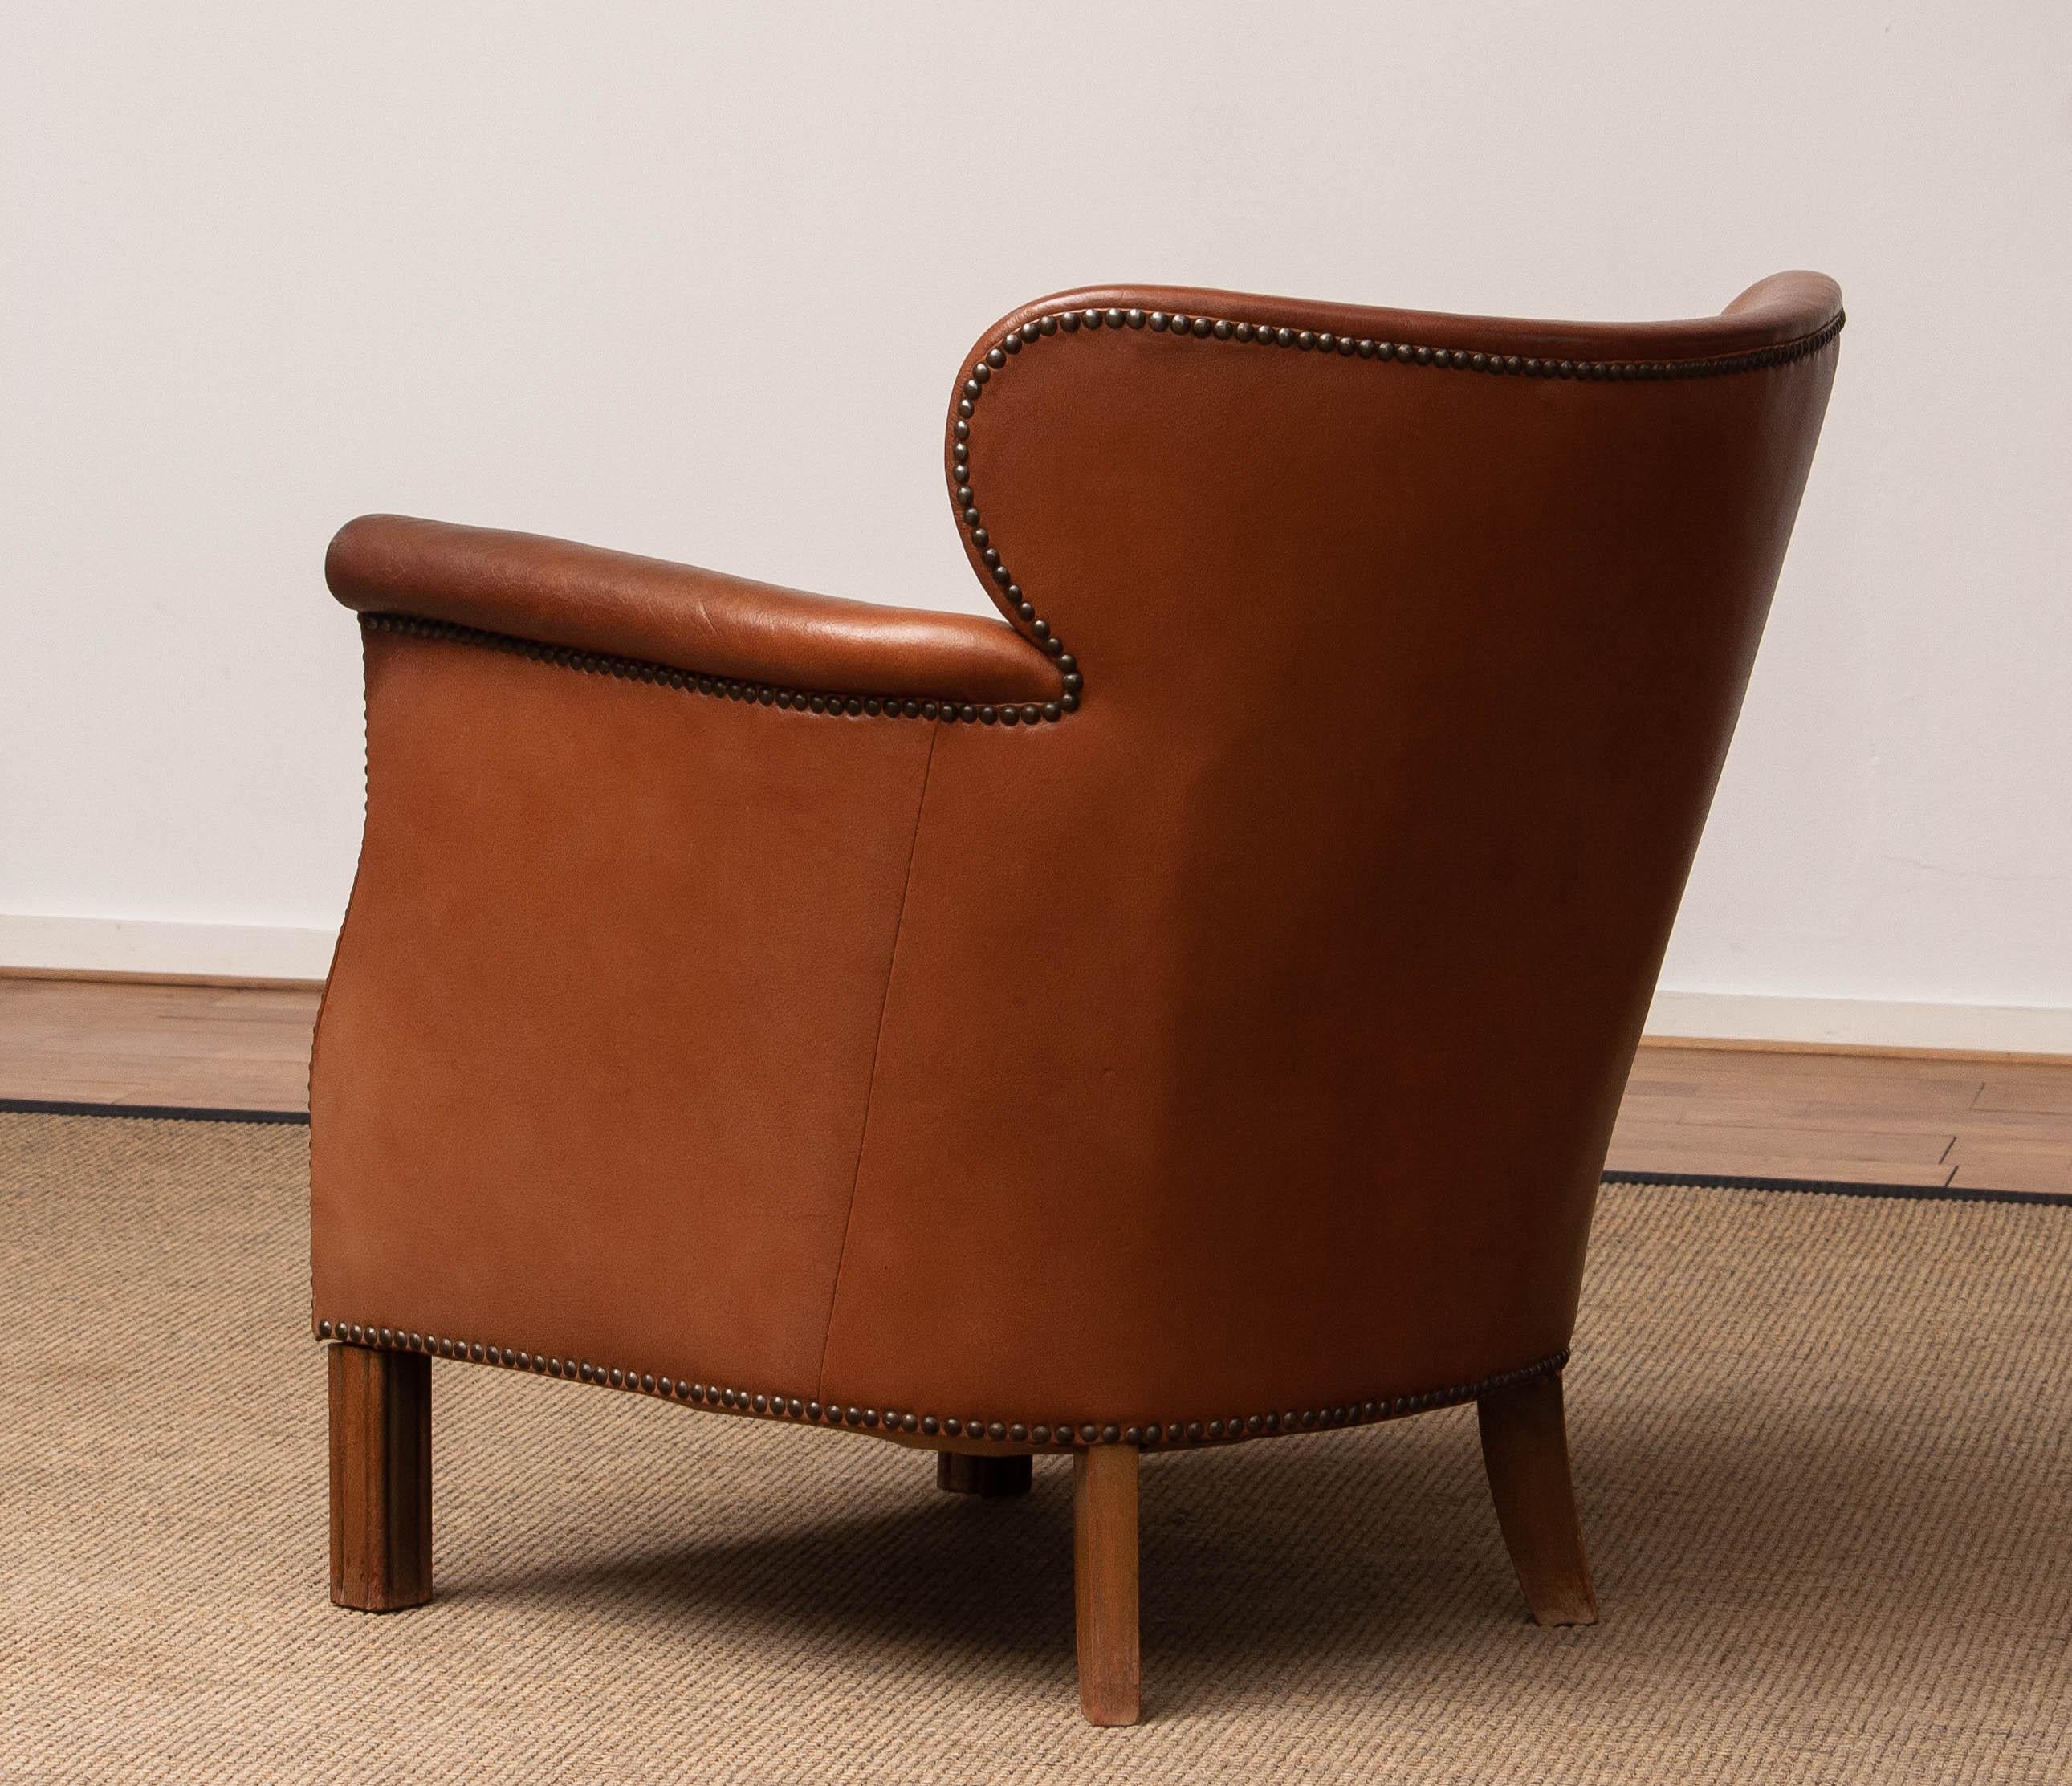 1940's Scandinavian Tan / Brown Nailed Leather Club / Cigar Chair from Denmark In Good Condition In Silvolde, Gelderland